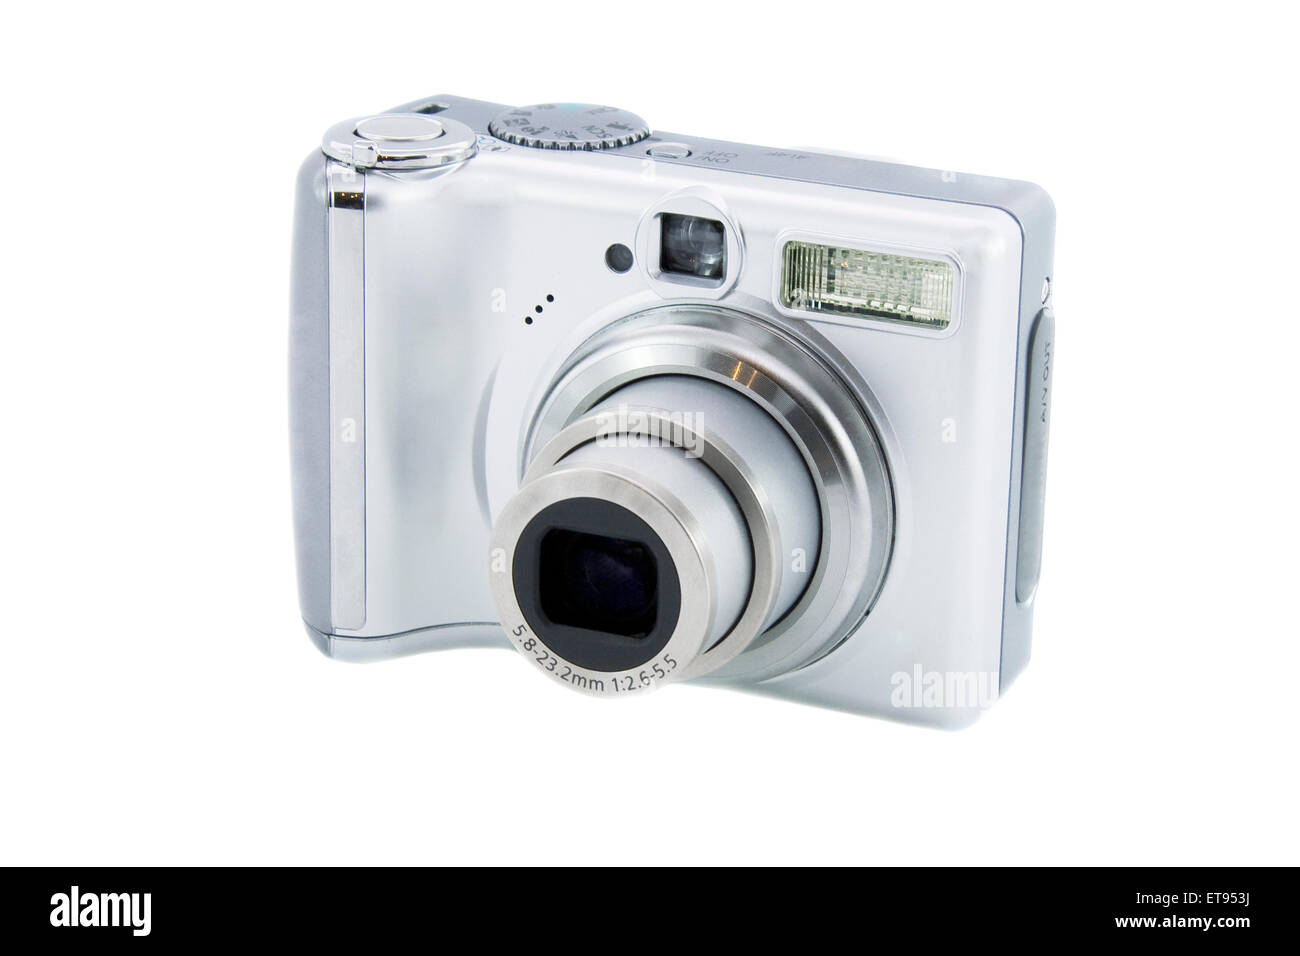 Silver digital camera isolated over white background Stock Photo